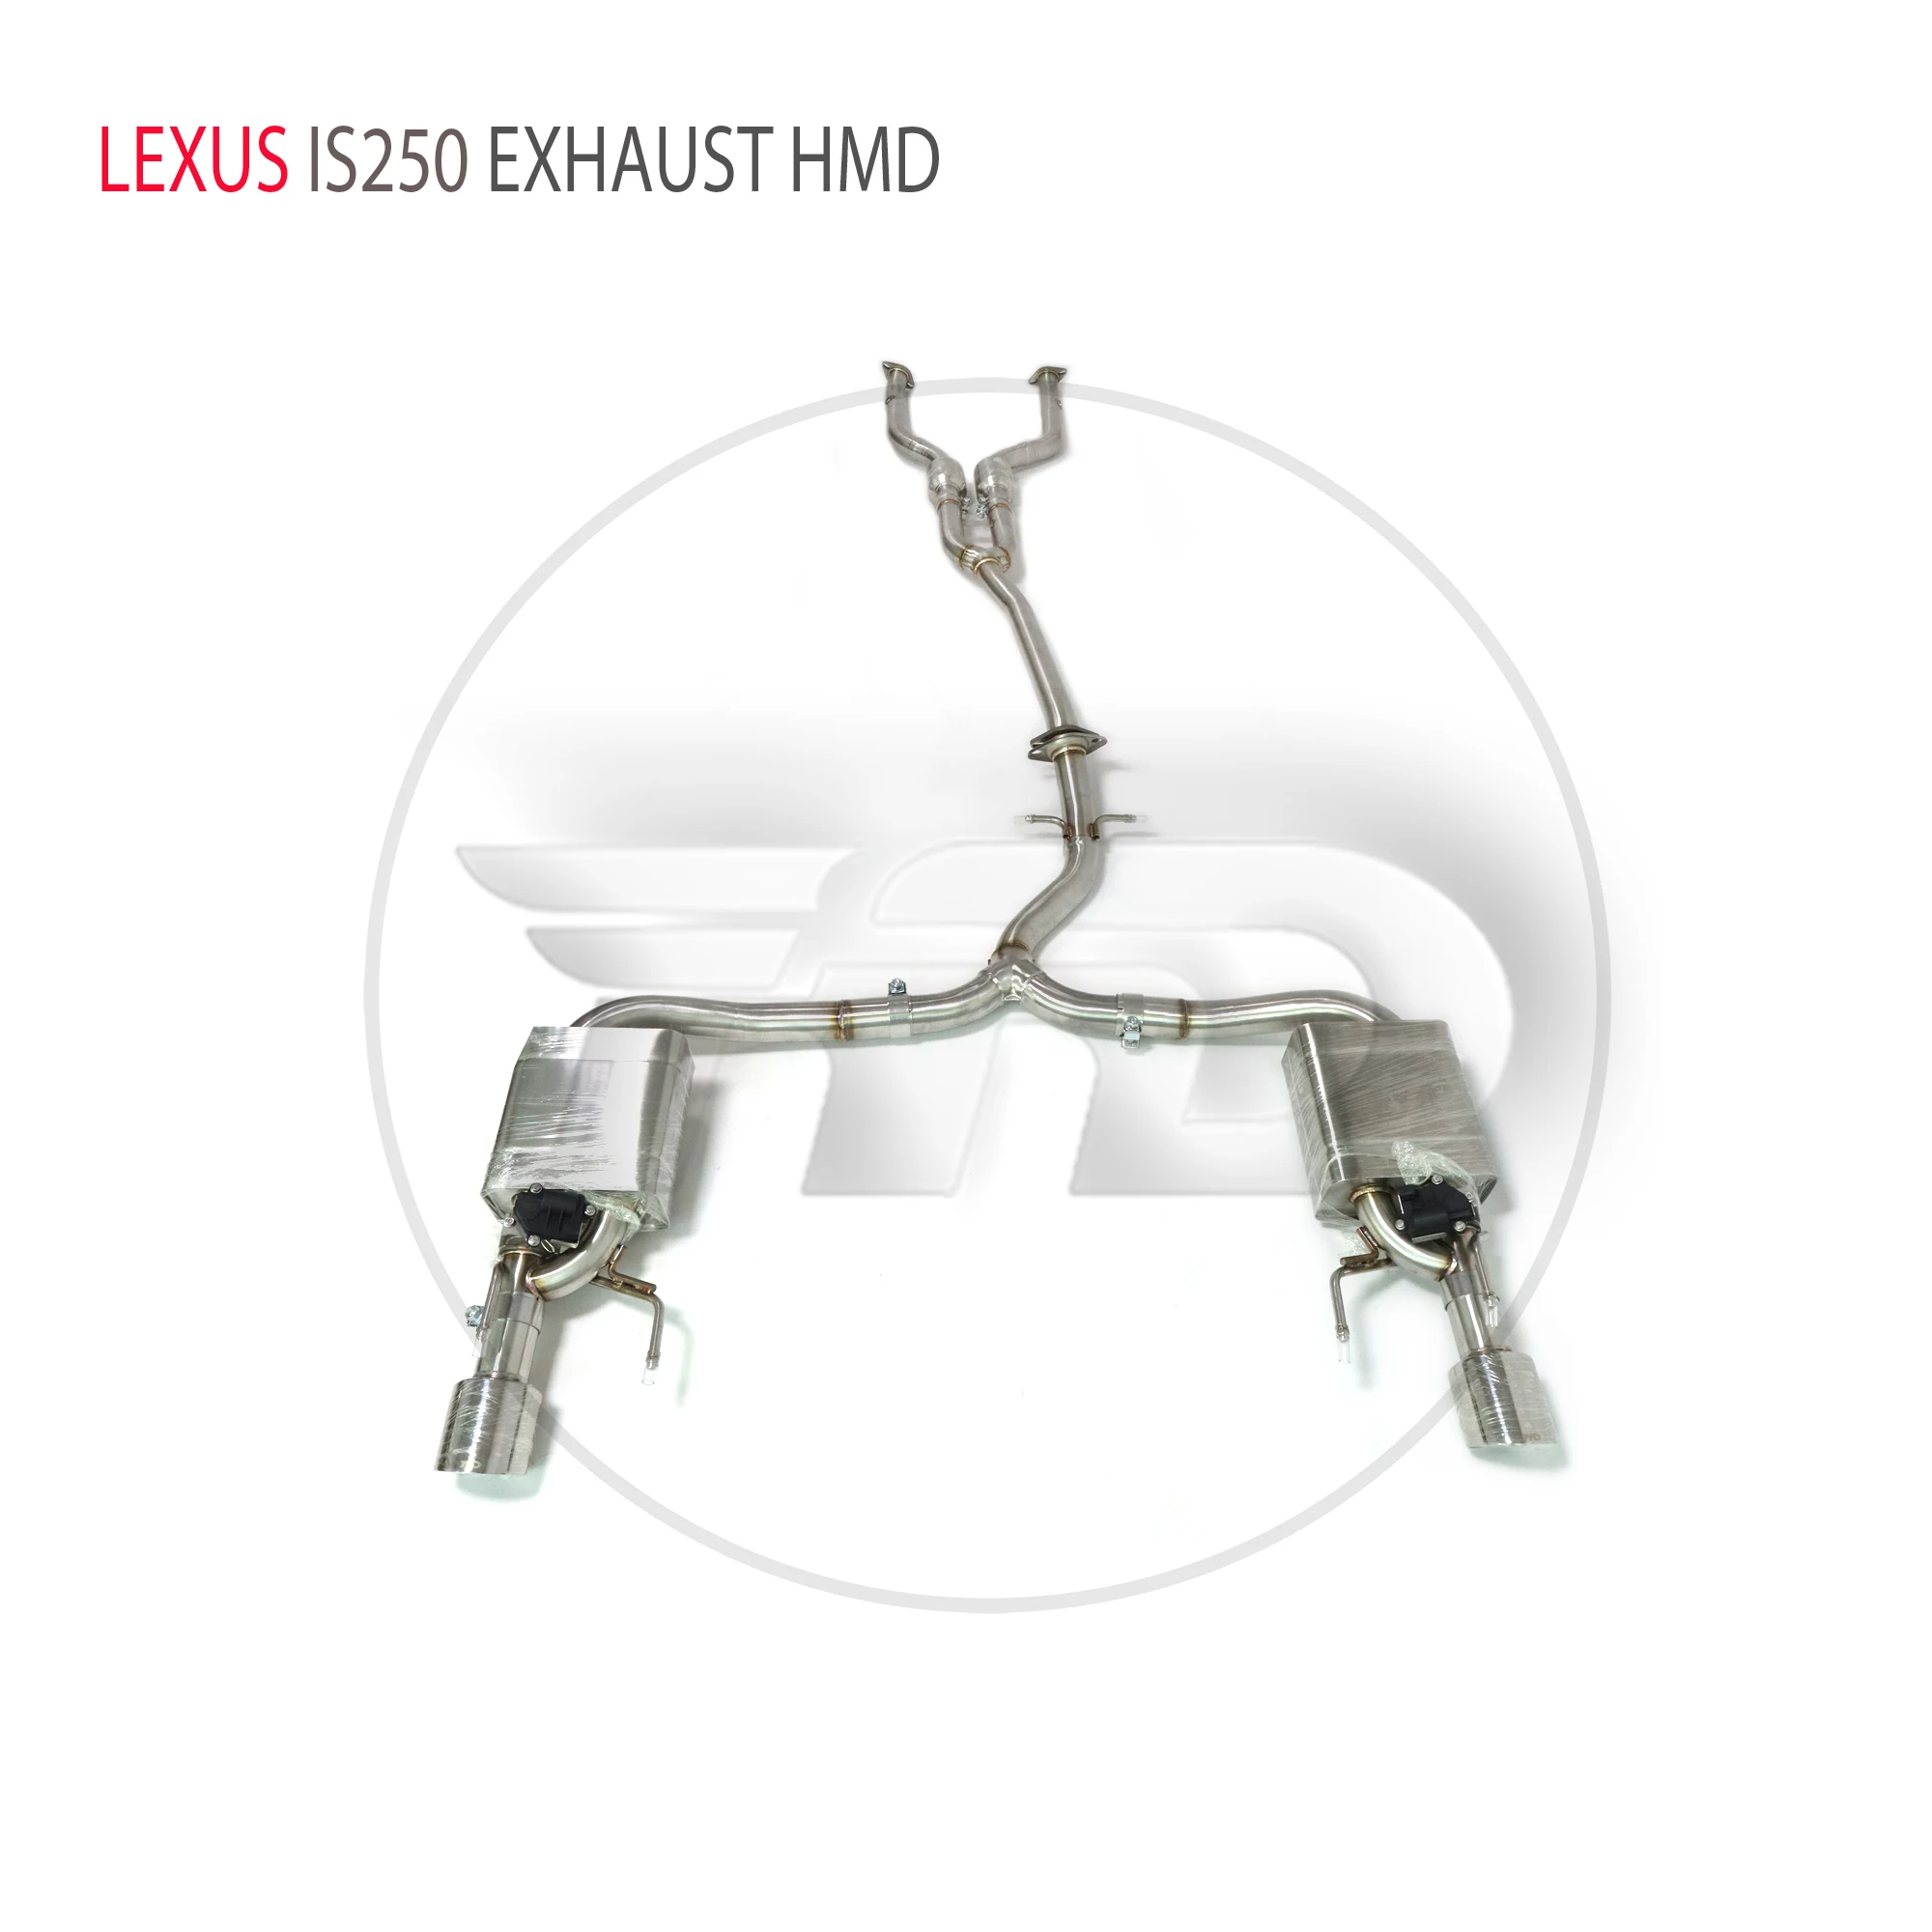 

HMD Stainless Steel Exhaust System Performance Catback for LEXUS IS250 Auto Electronic Valve Muffler